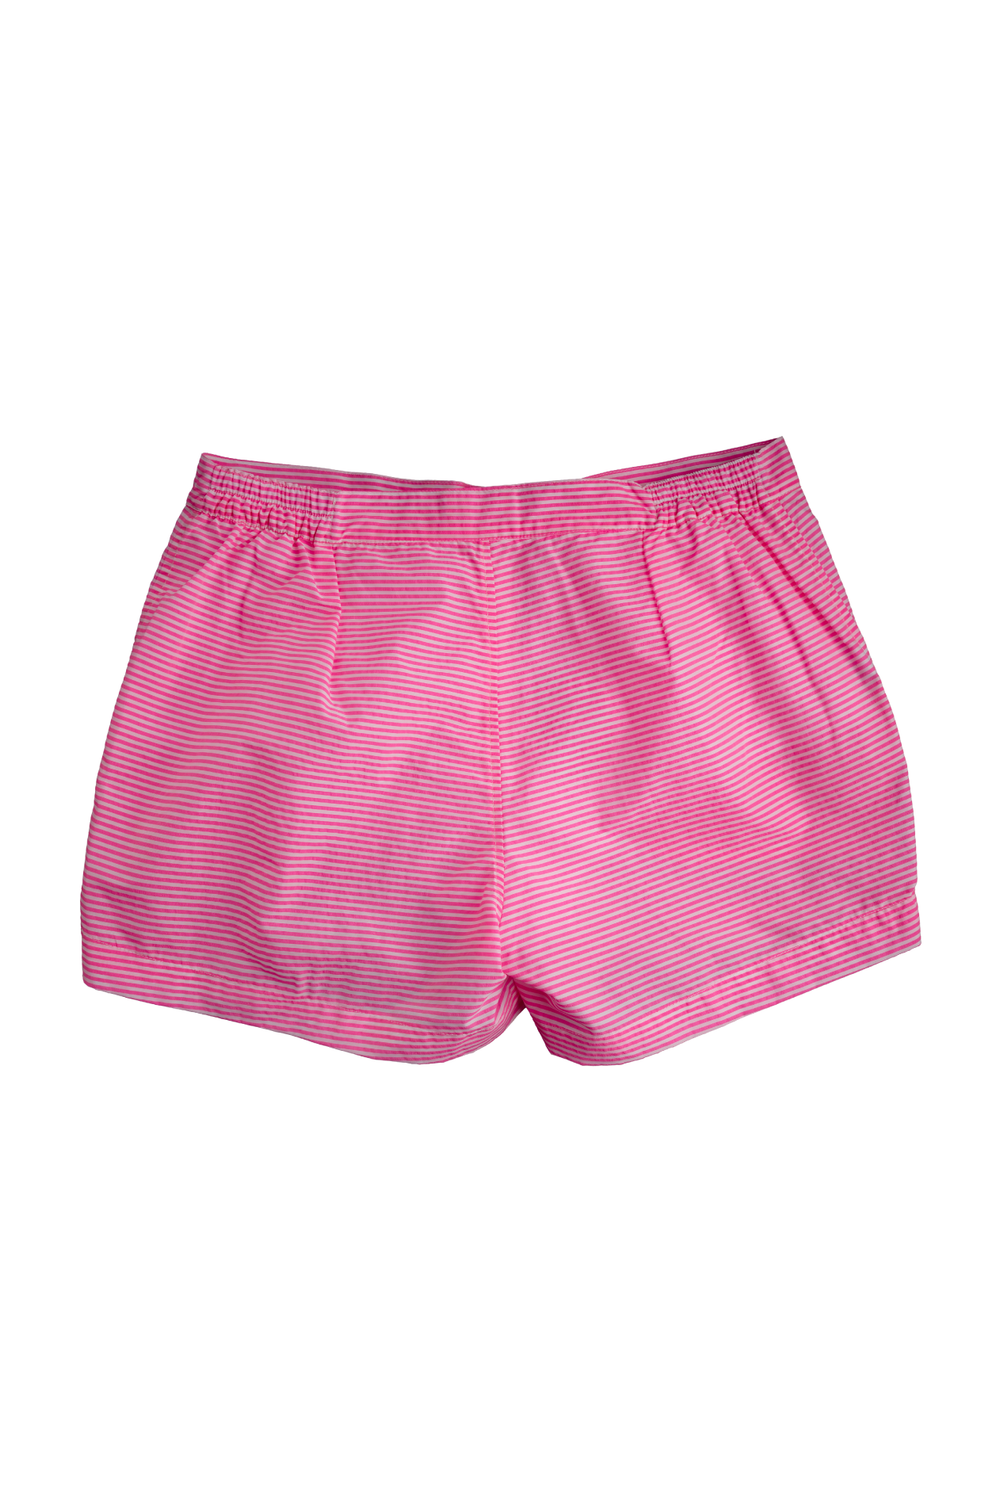 Pink striped shorts with elastic waistband